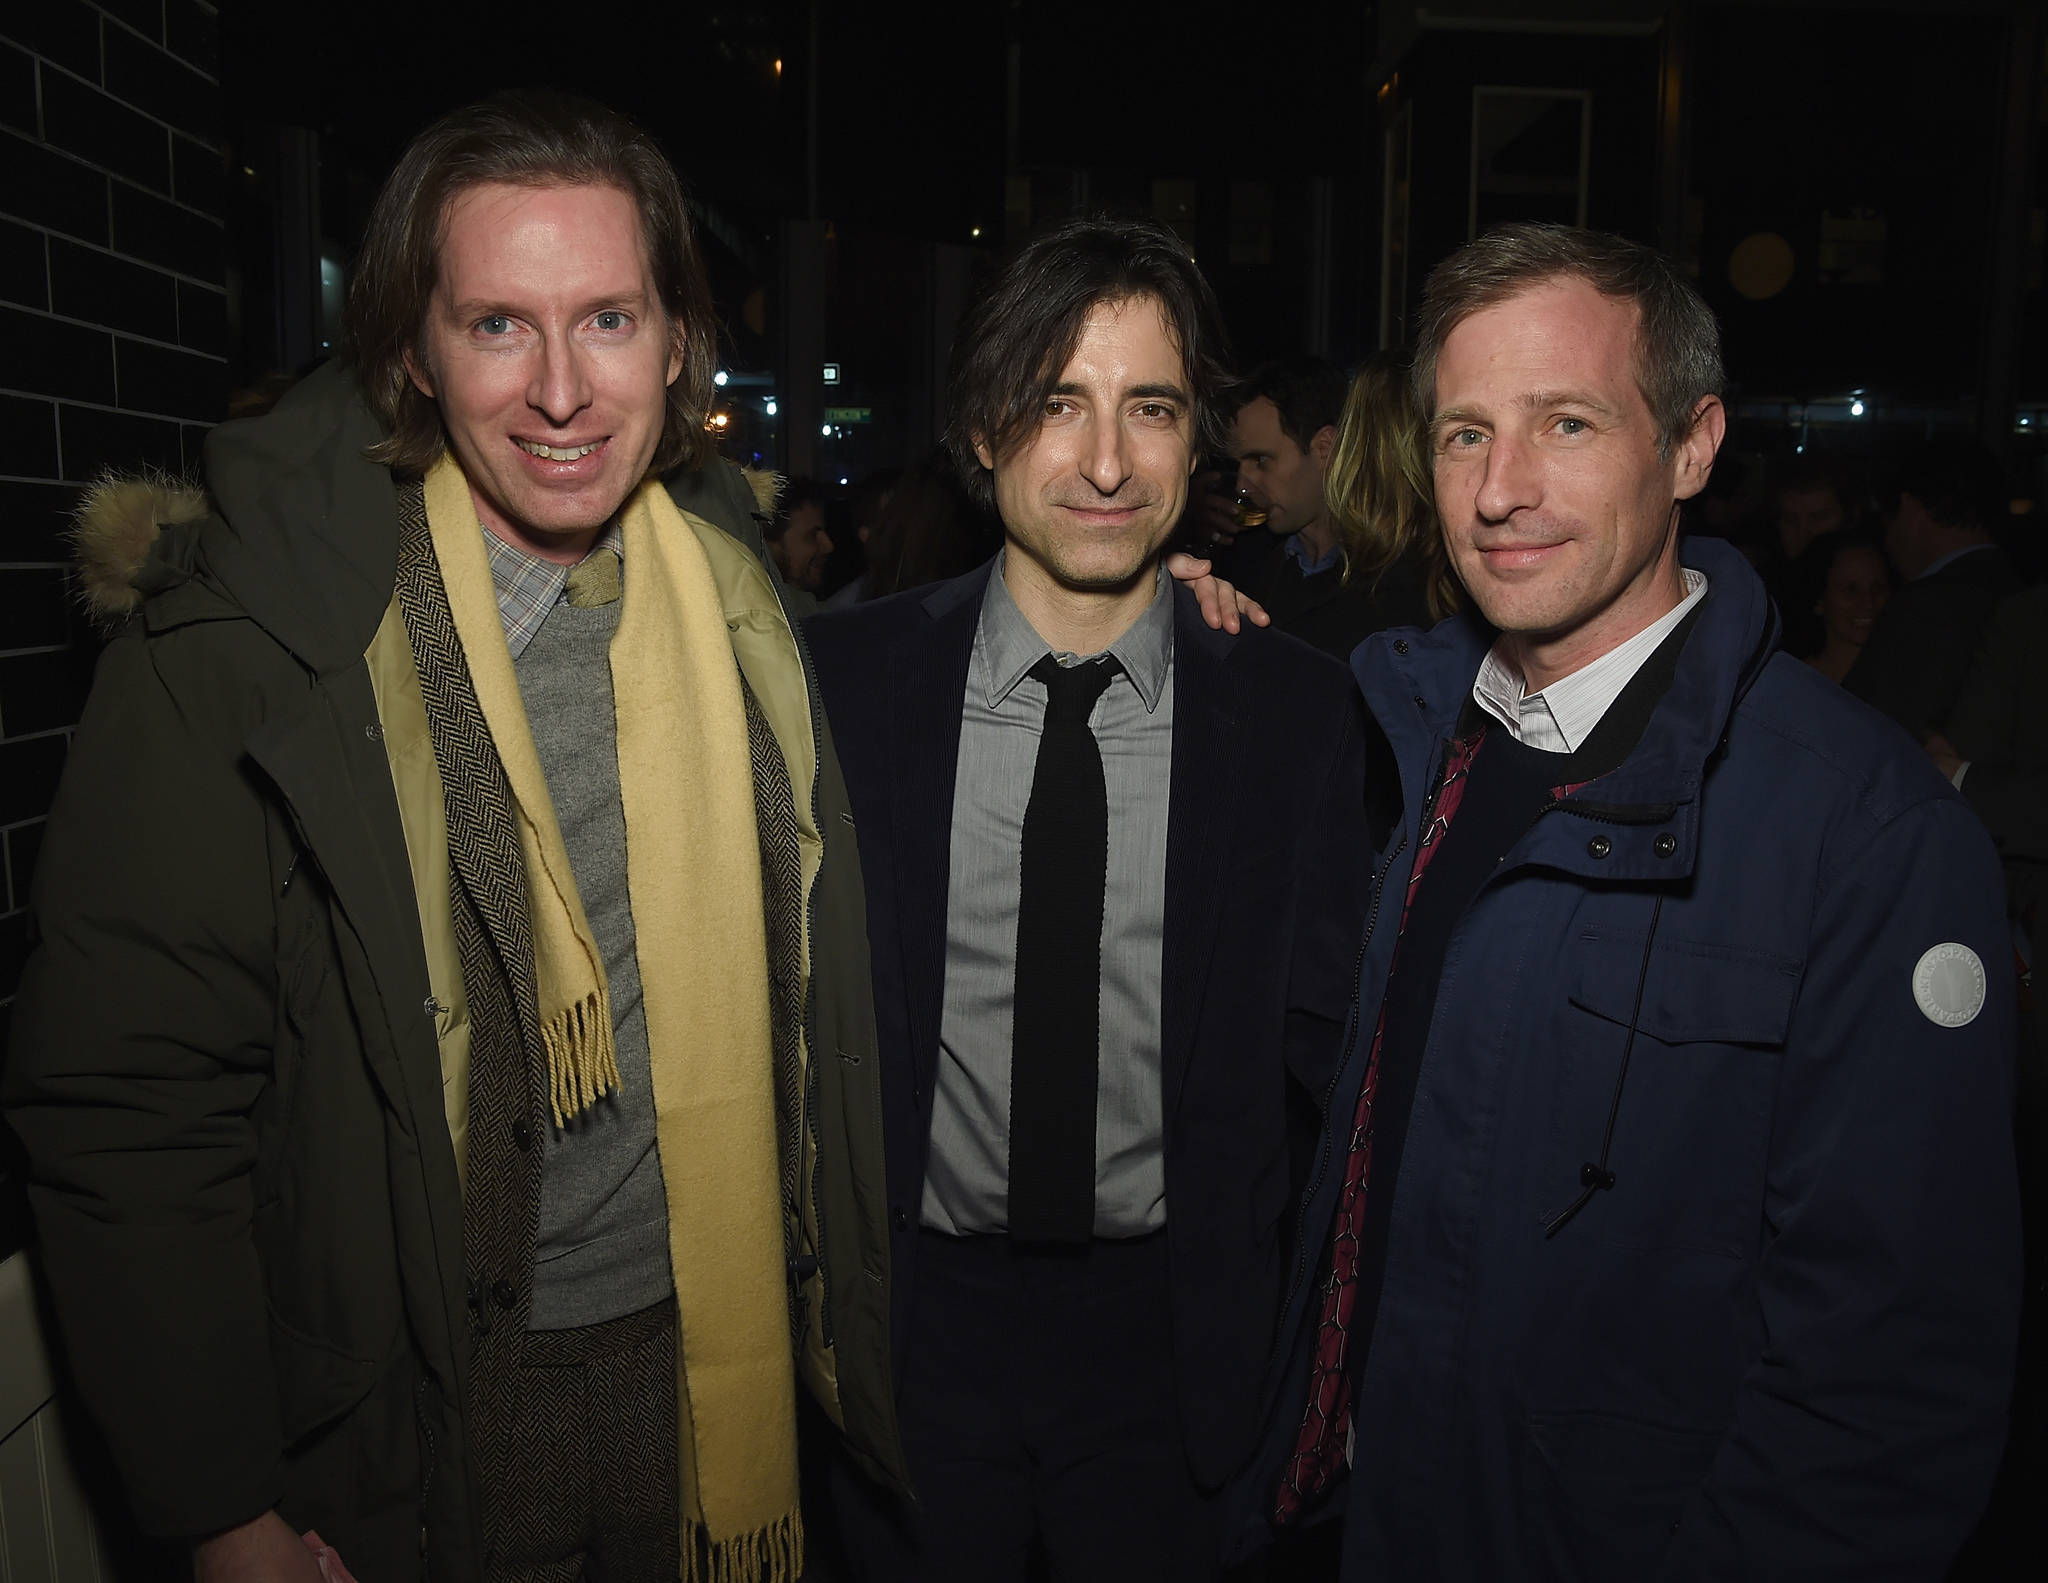 Noah Baumbach, Spike Jonze and Wes Anderson at event of While We're Young (2014)